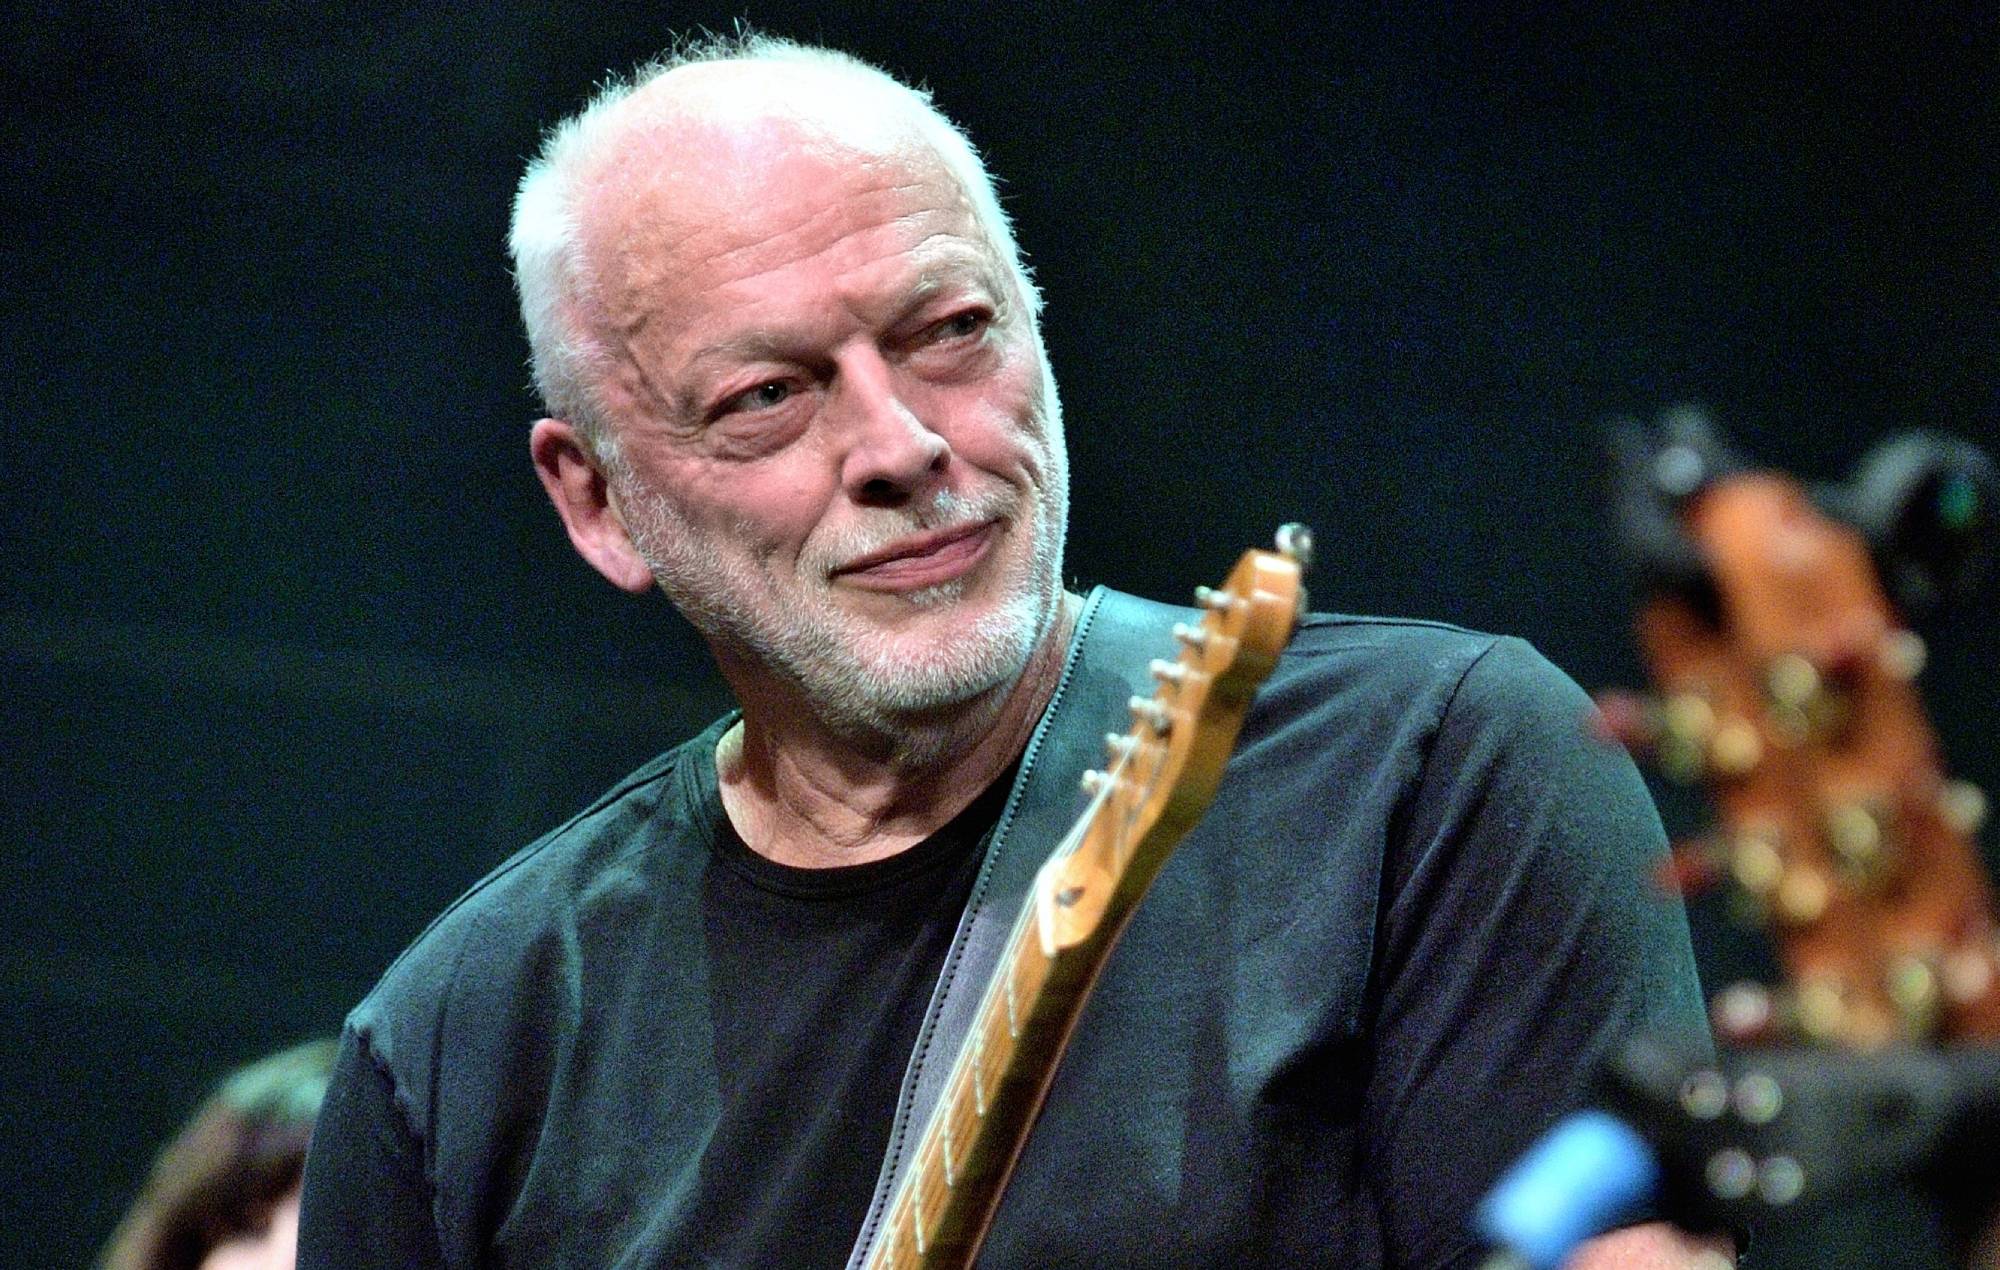 David Gilmour would allow an ABBA Voyage-style Pink Floyd hologram show under “a series of very, very difficult and onerous conditions”